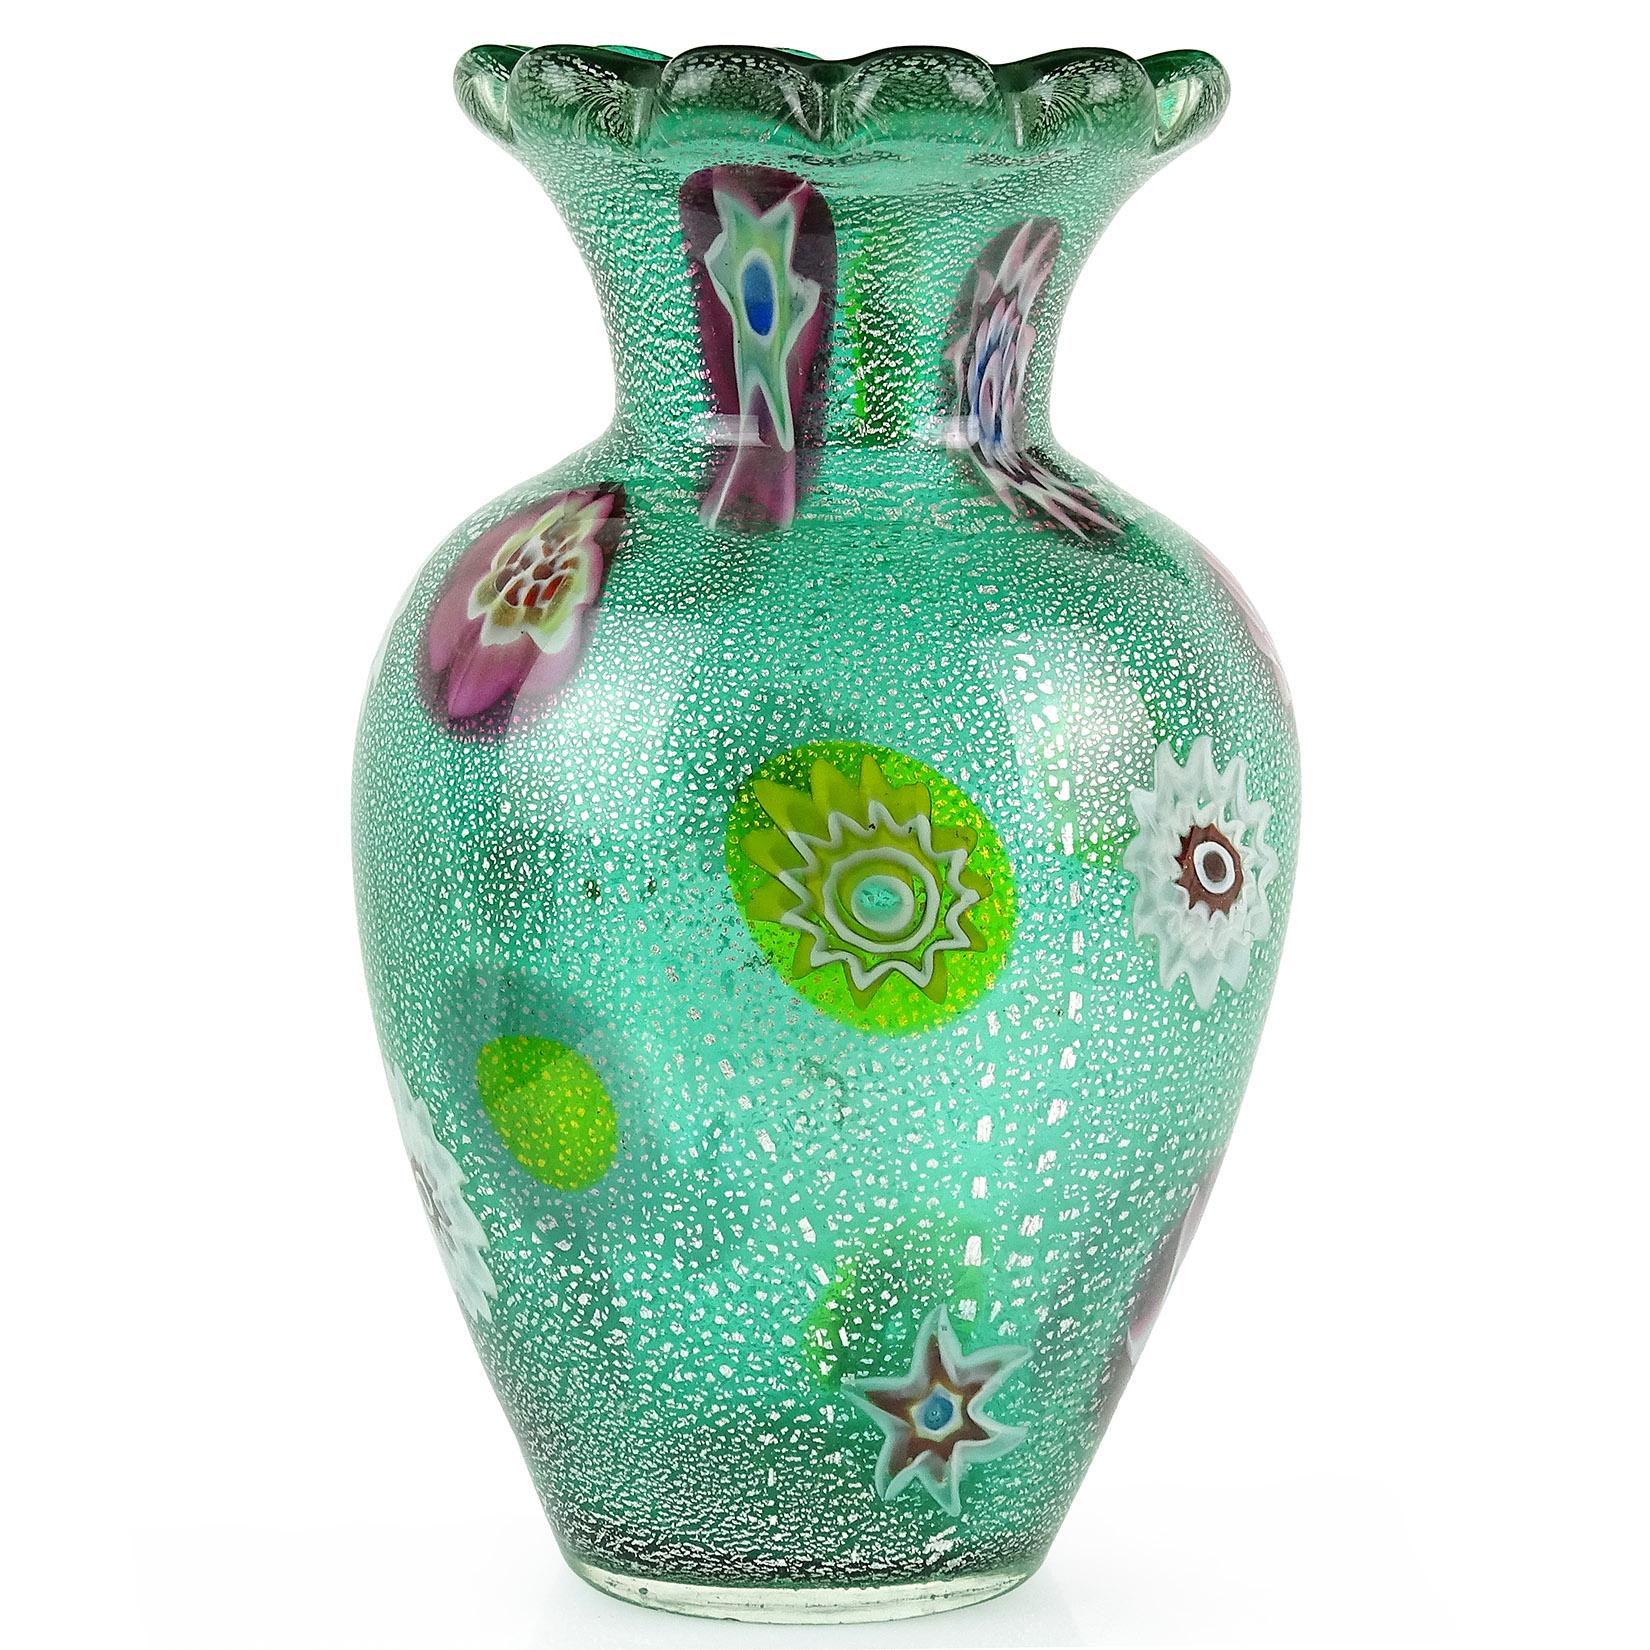 Beautiful vintage Murano hand blown green, silver flecks and large millefiori murrines Italian art glass flower vase. Documented to the A.Ve.M. (Arte Vetraria Muranese) company and attributed to designer Giulio Radi. Made of thick glass, with